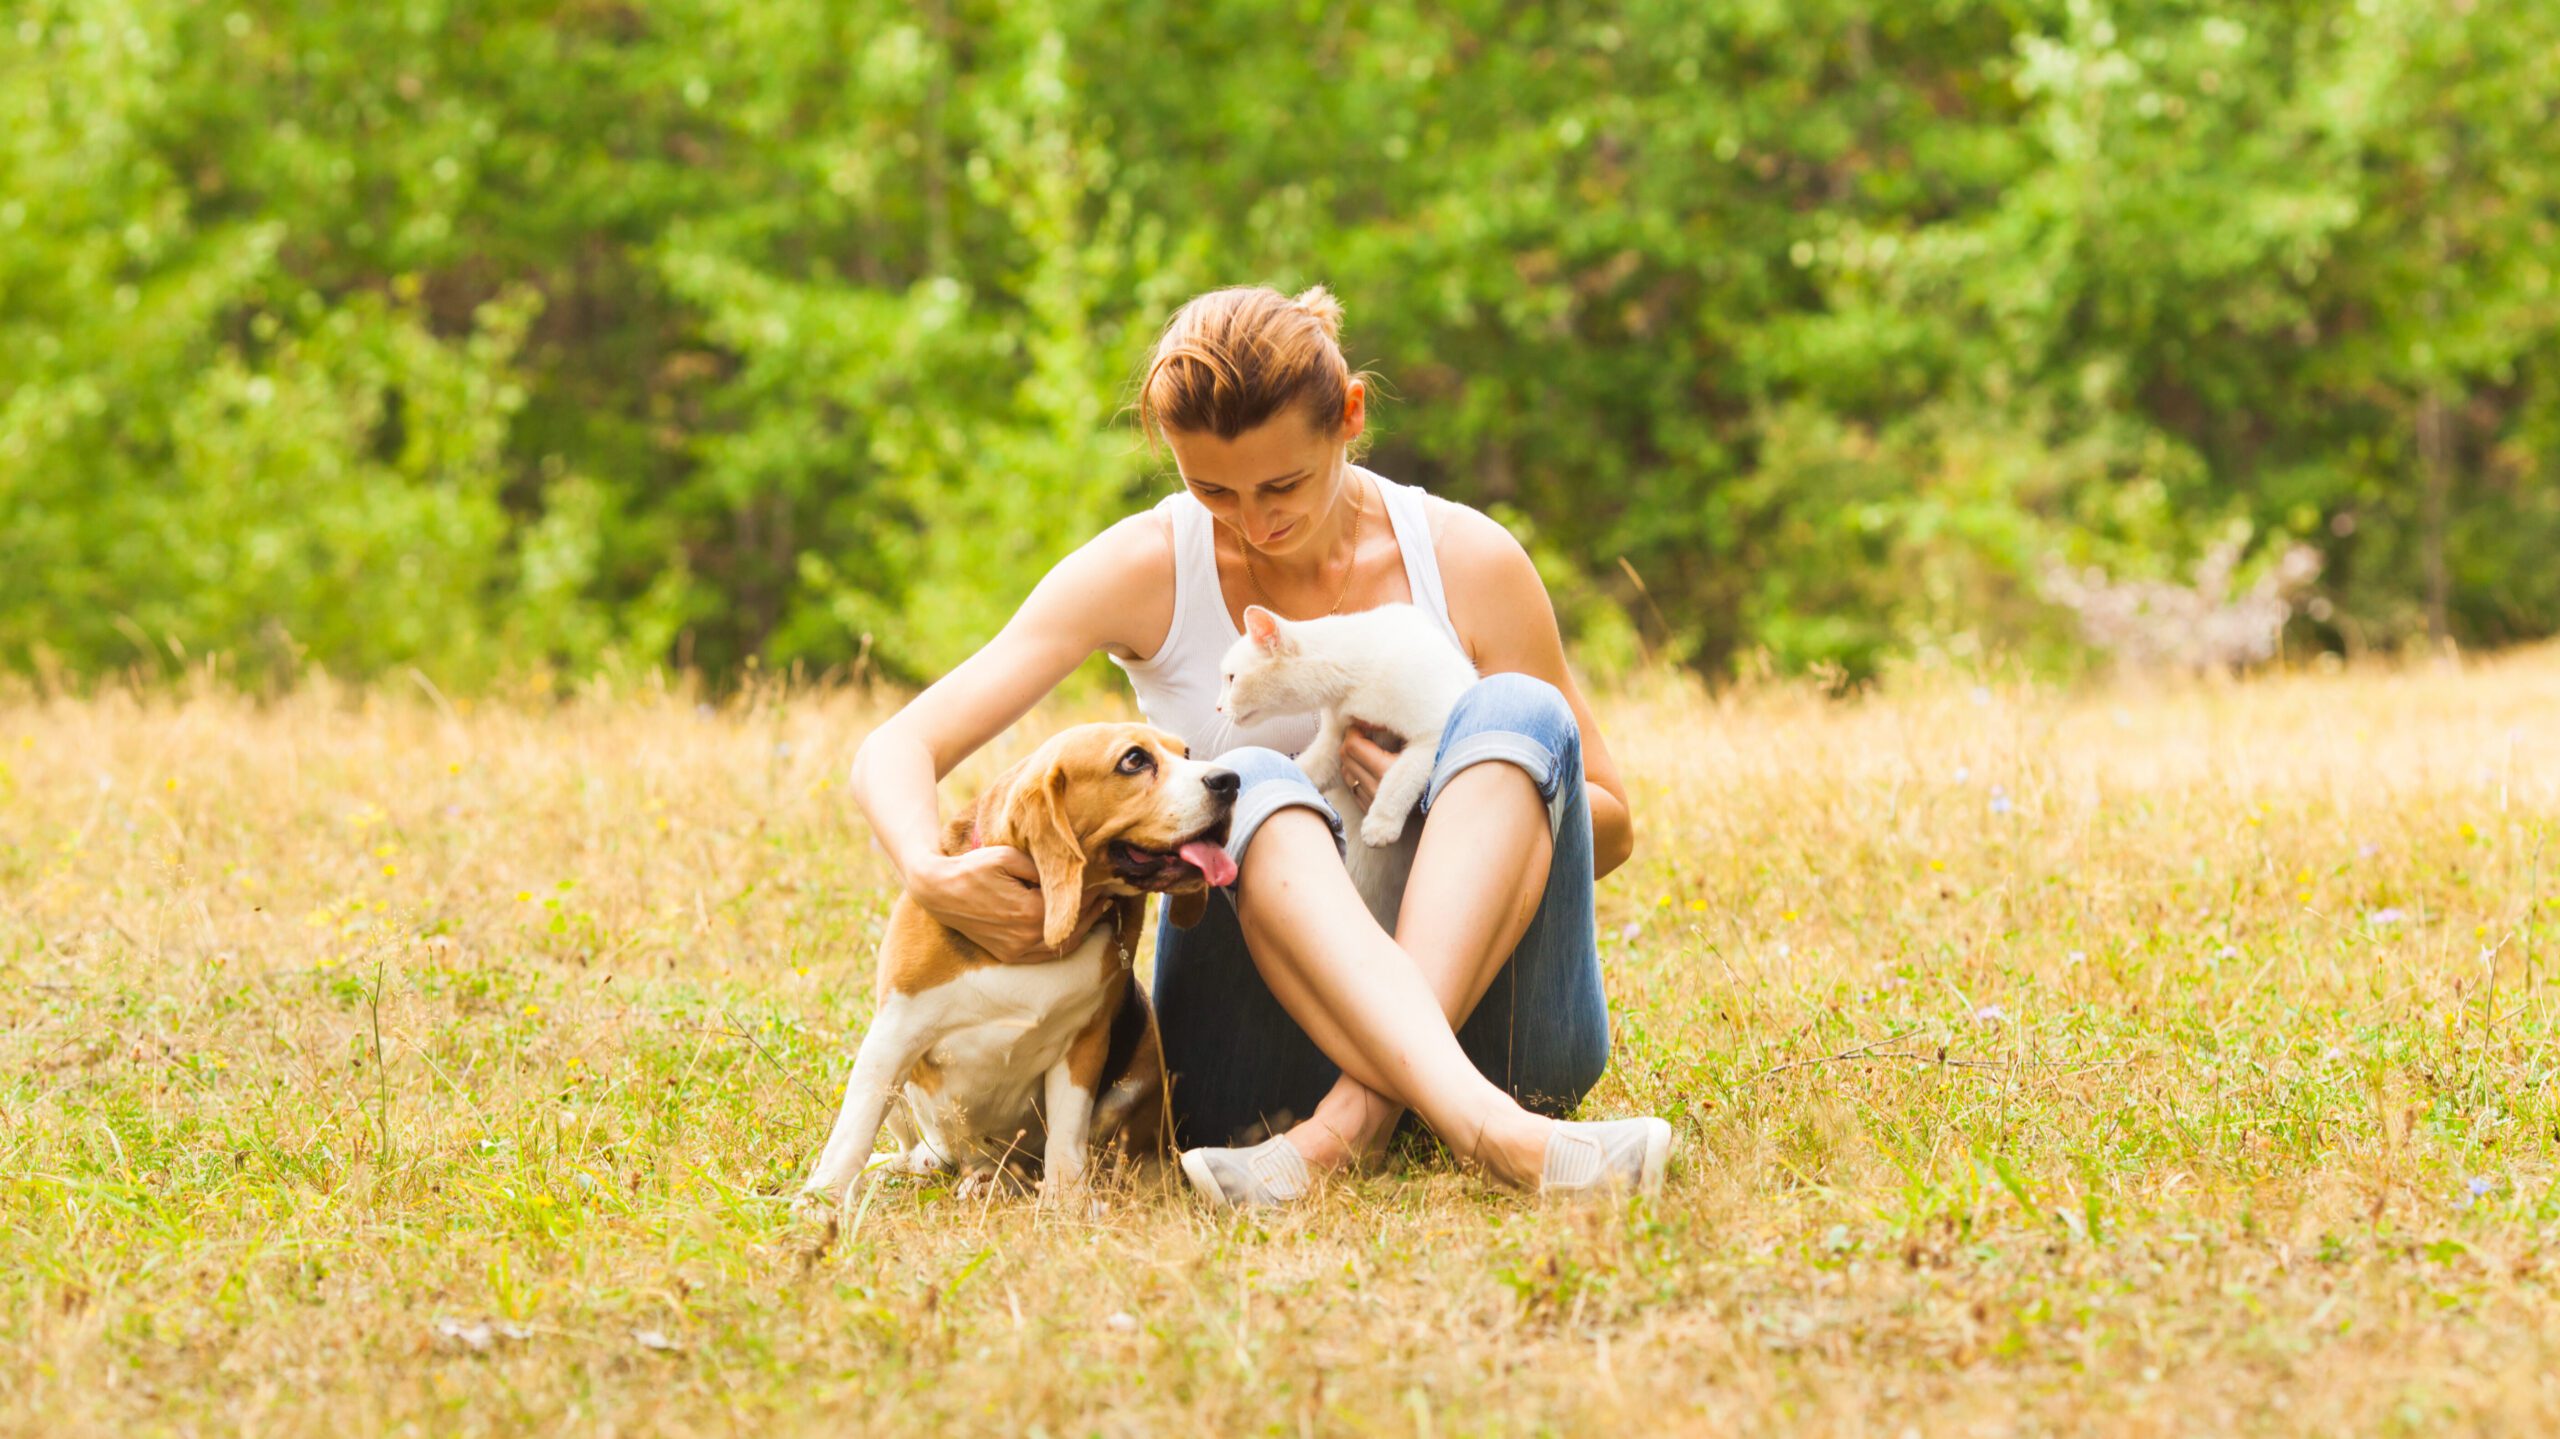 The mental health and mood benefits of owning a pet are numerous and have been scientifically proven.